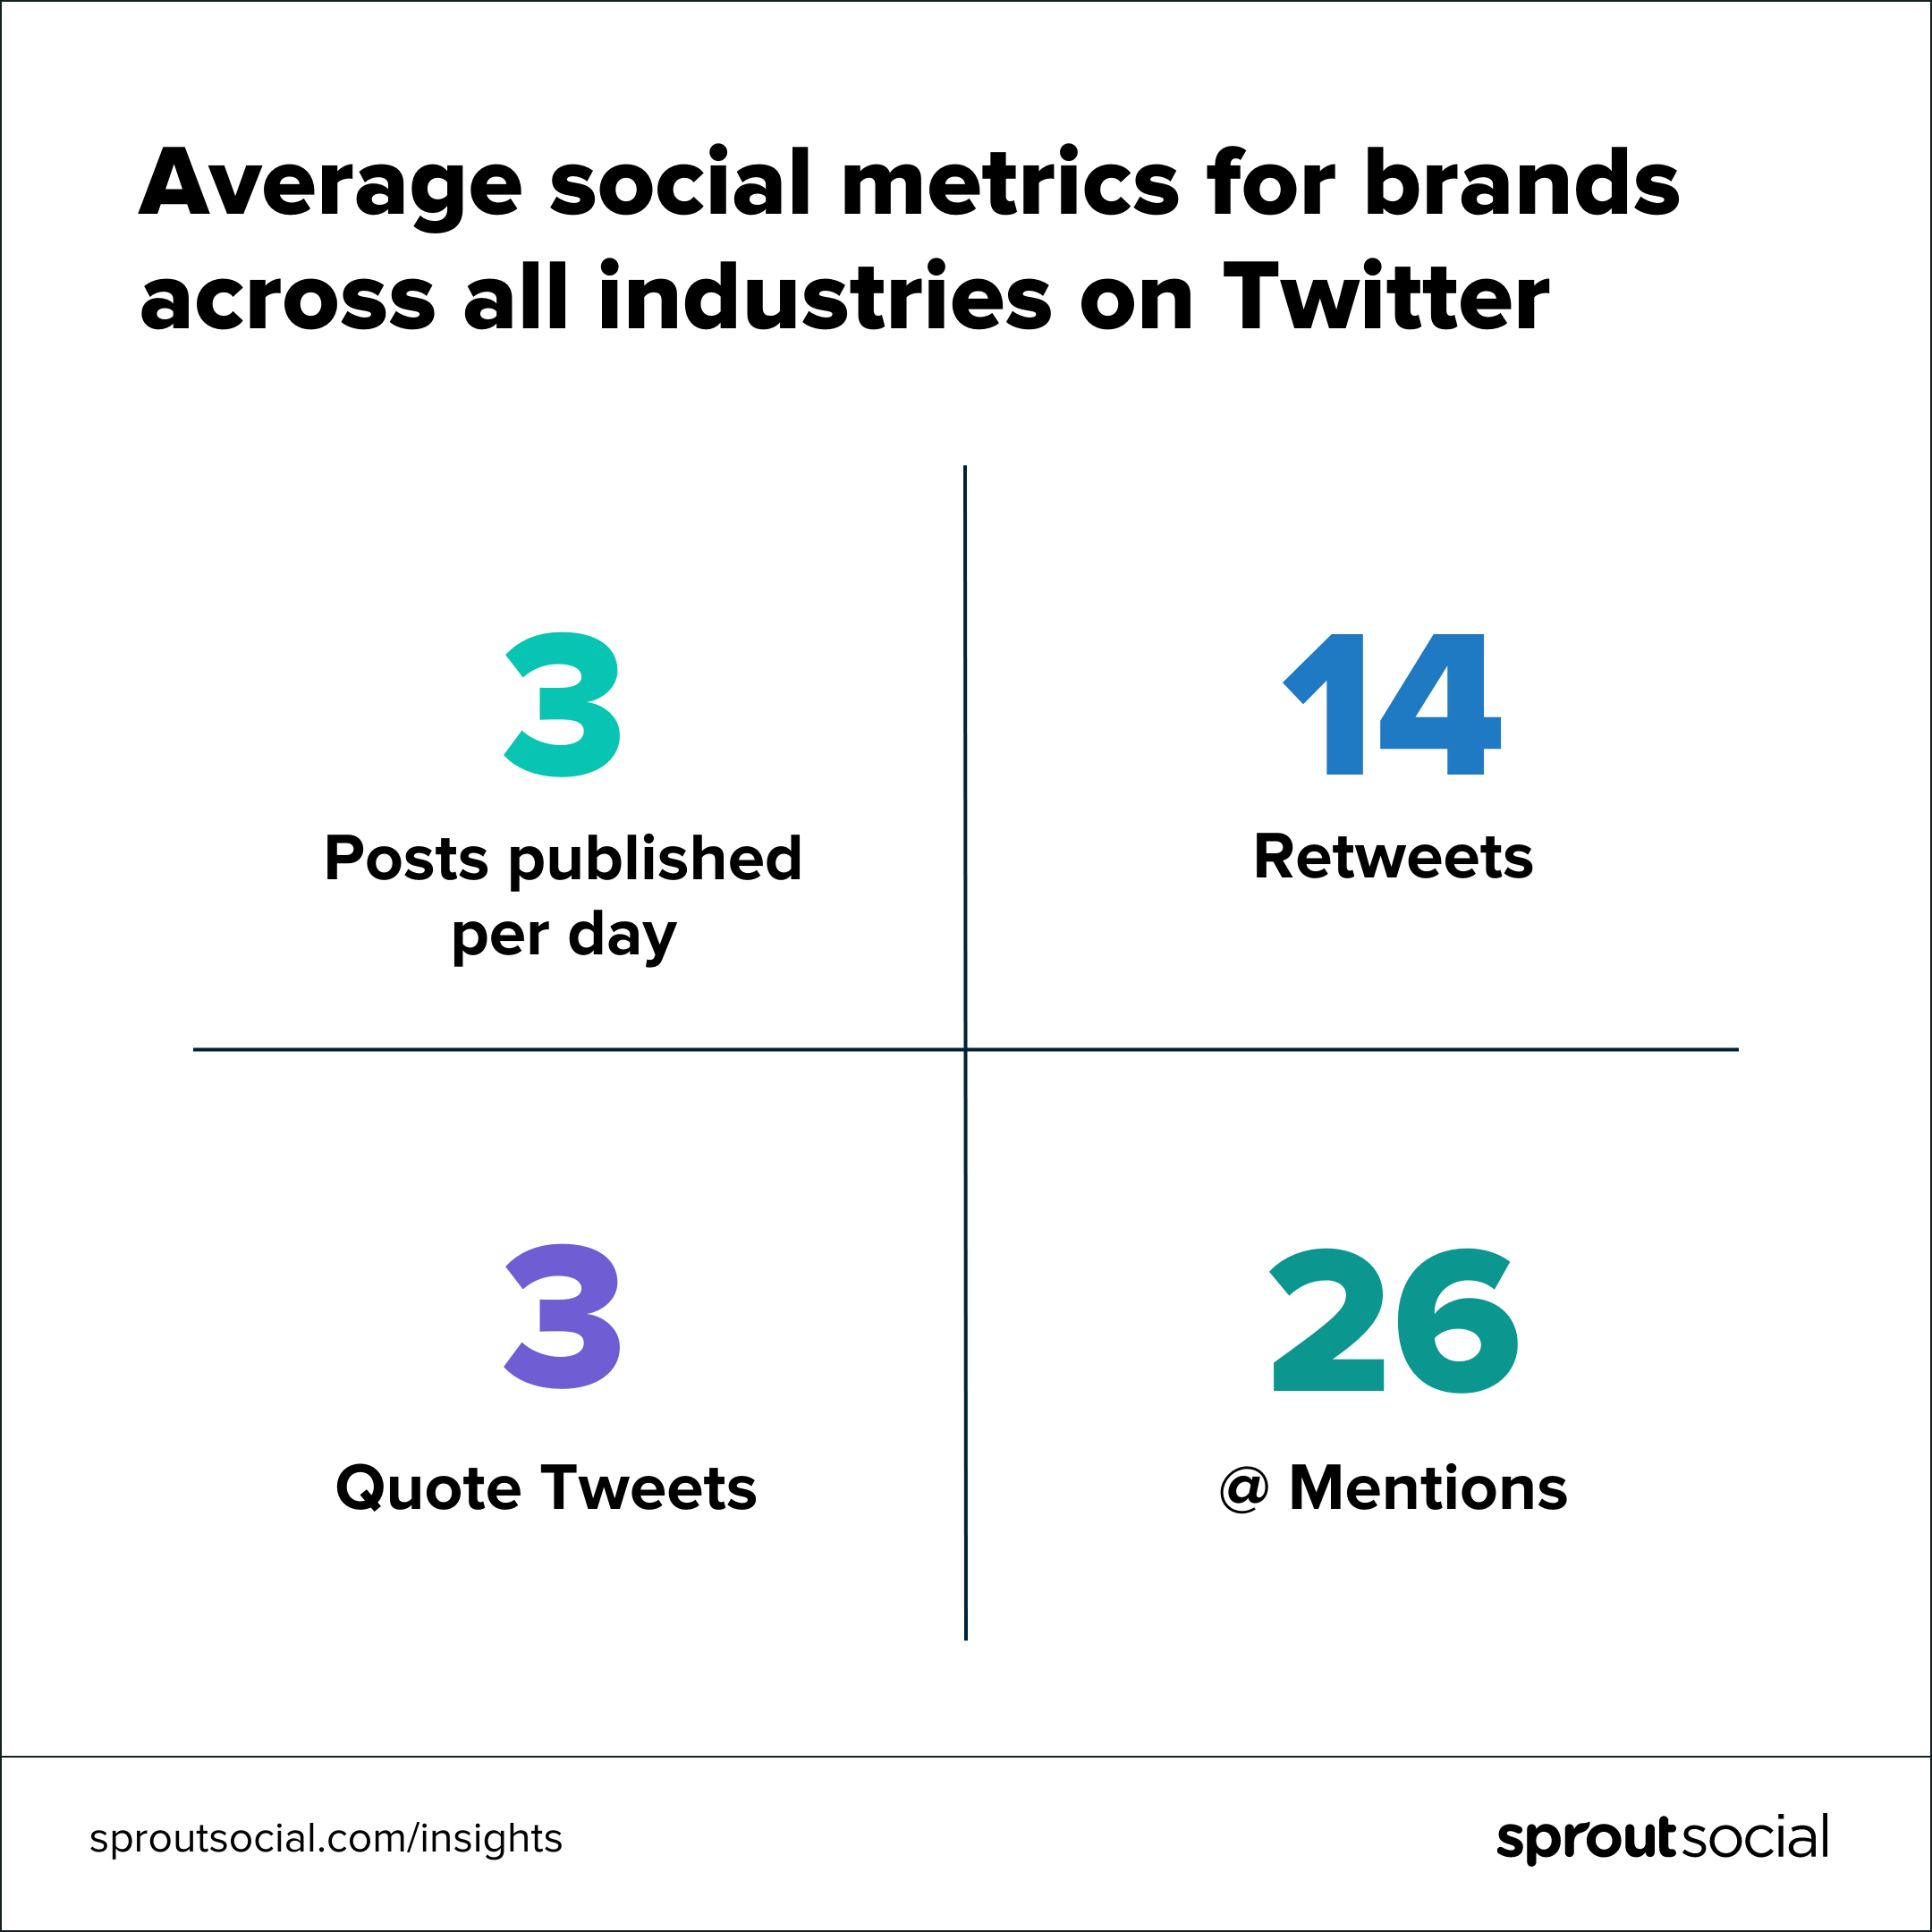 A chart showing the average social metrics for brands across all industries on Twitter. On average, brands publish 3 posts per day. They receive 14 Retweets, 3 Quote Tweets and 26 @ mentions per day, as well.